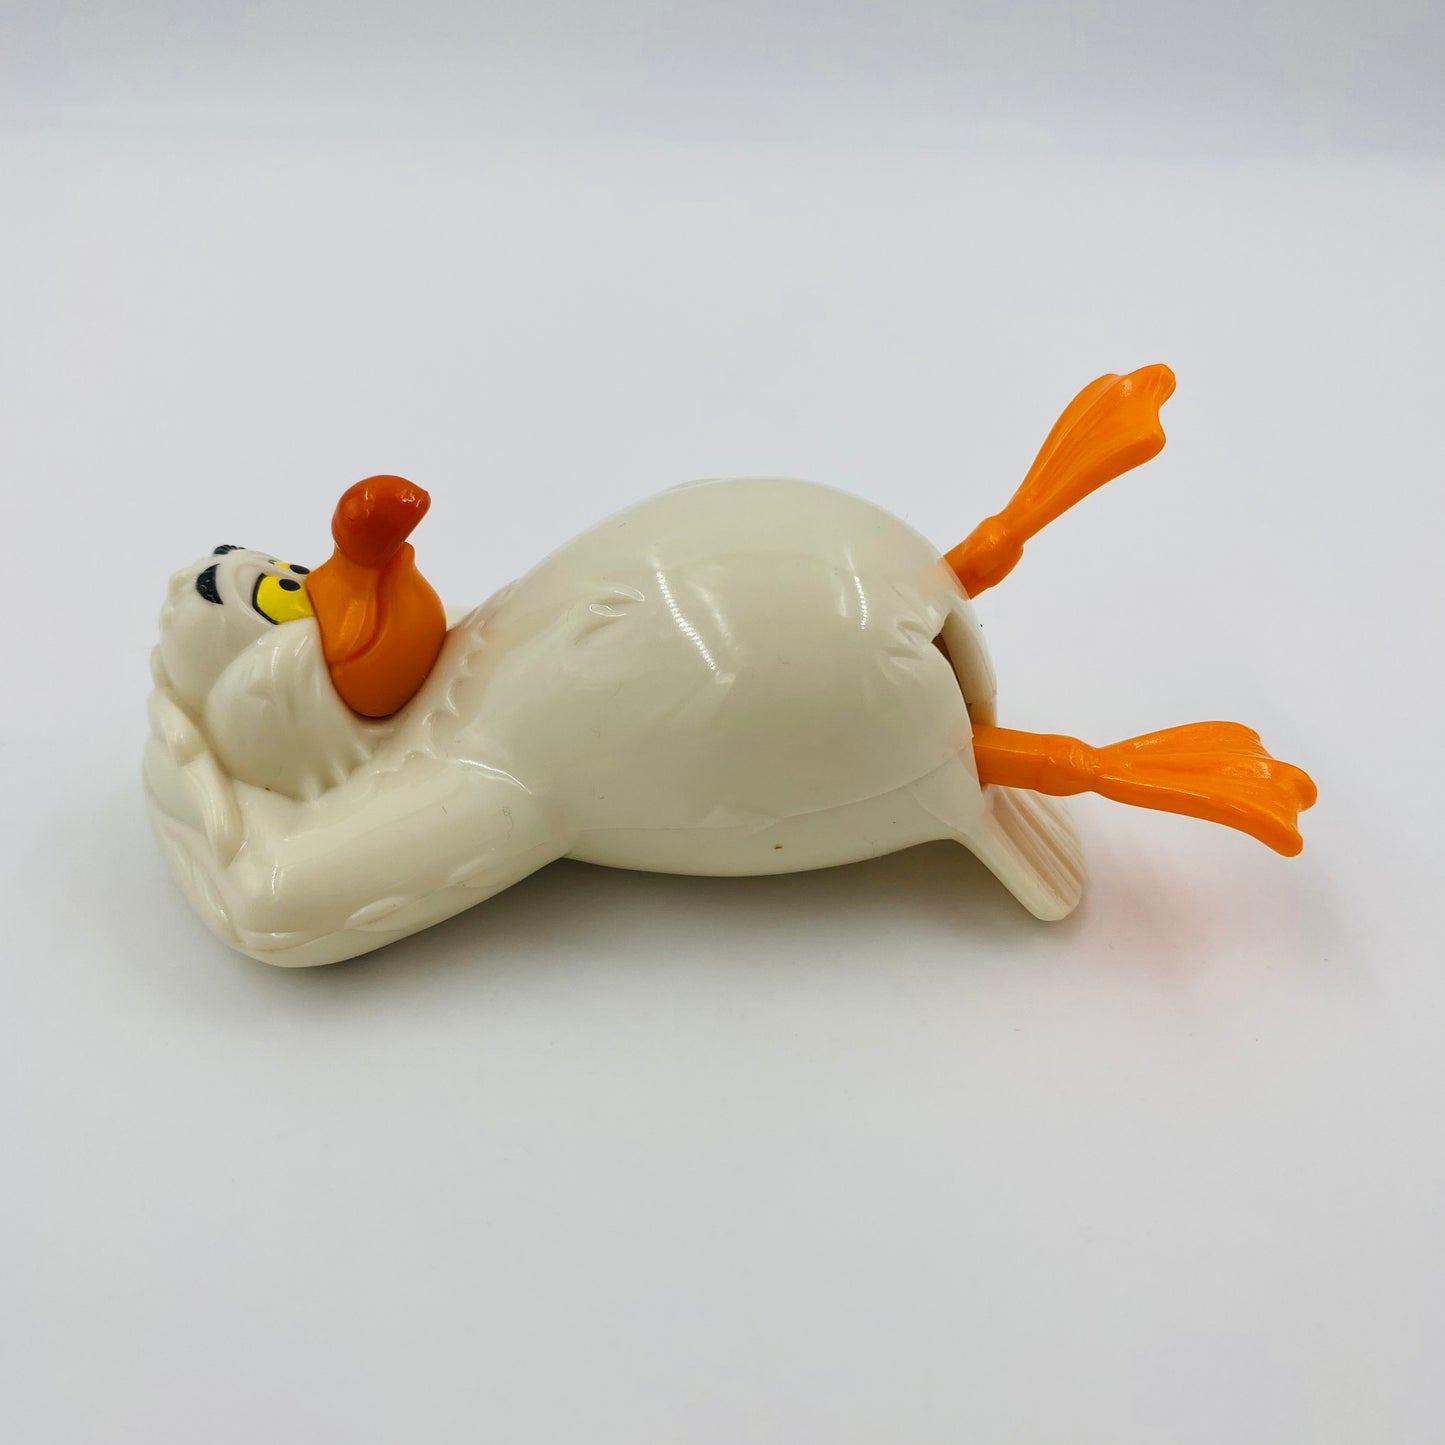 Little Mermaid Scuttle McDonald's Happy Meal wind up toy (1996) loose